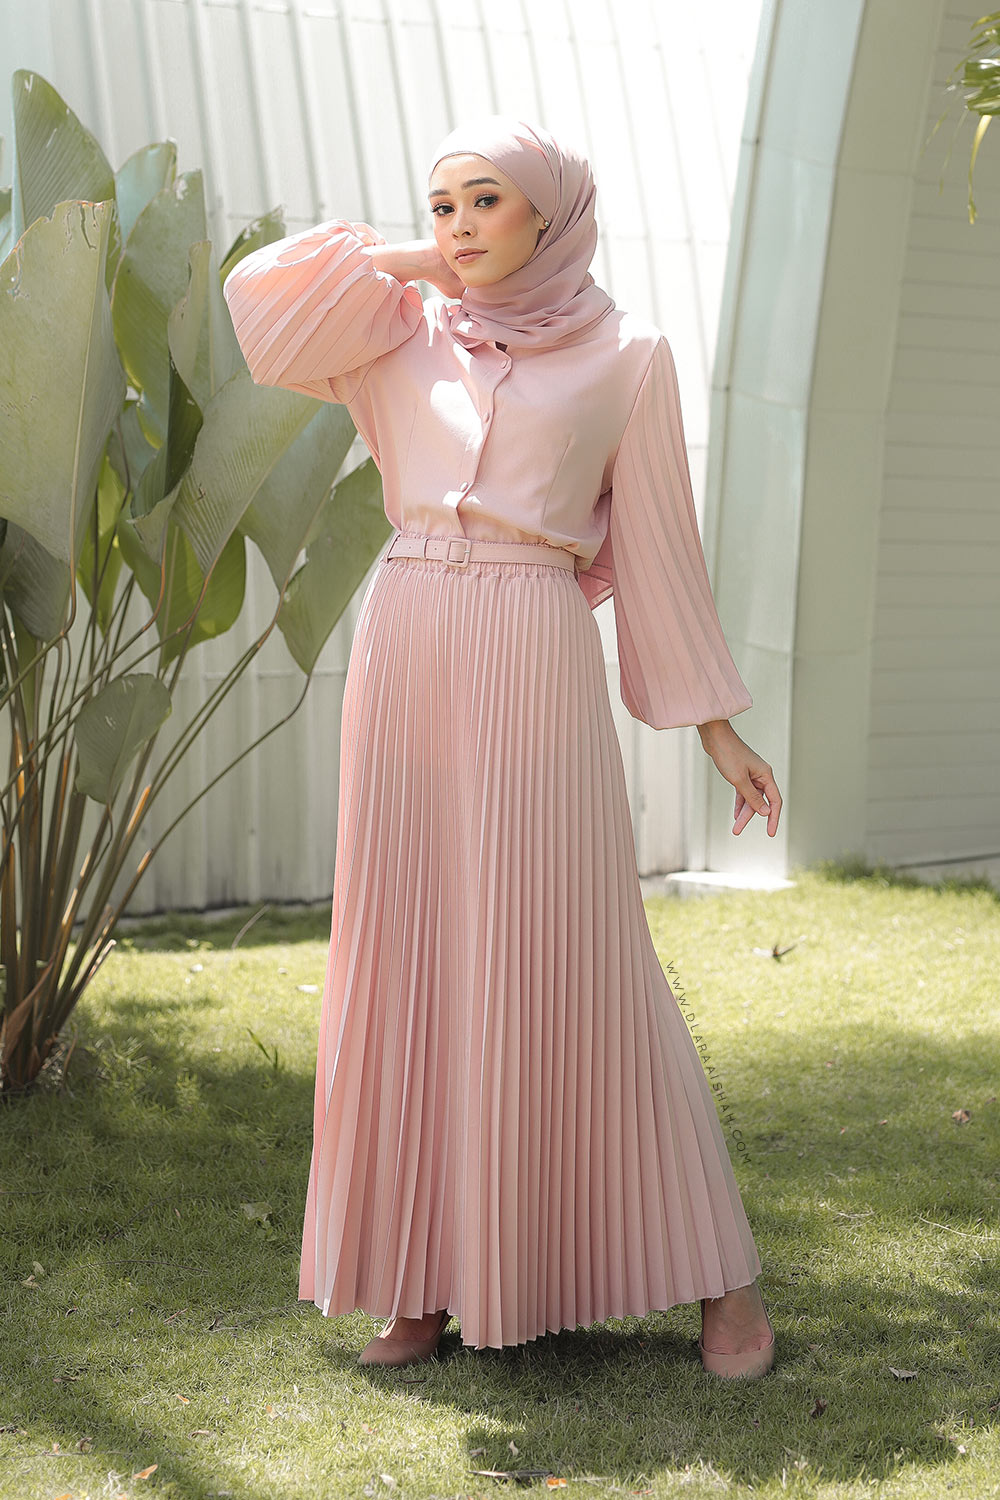 MADELINE TOP - PINK BLUSH (TOP ONLY)